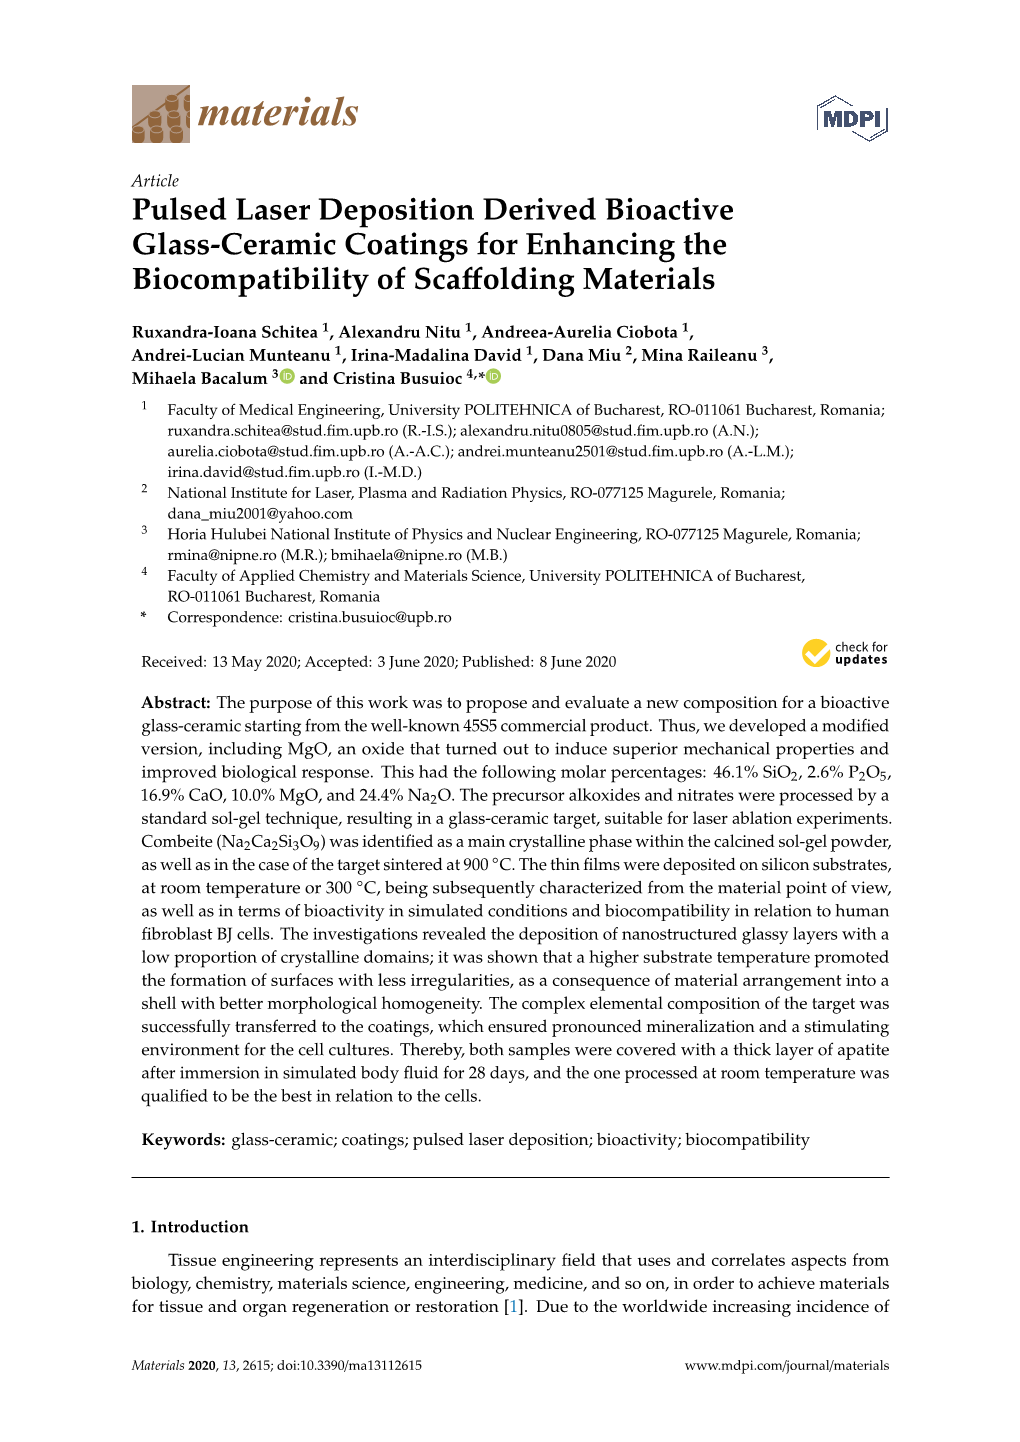 Pulsed Laser Deposition Derived Bioactive Glass-Ceramic Coatings for Enhancing the Biocompatibility of Scaﬀolding Materials